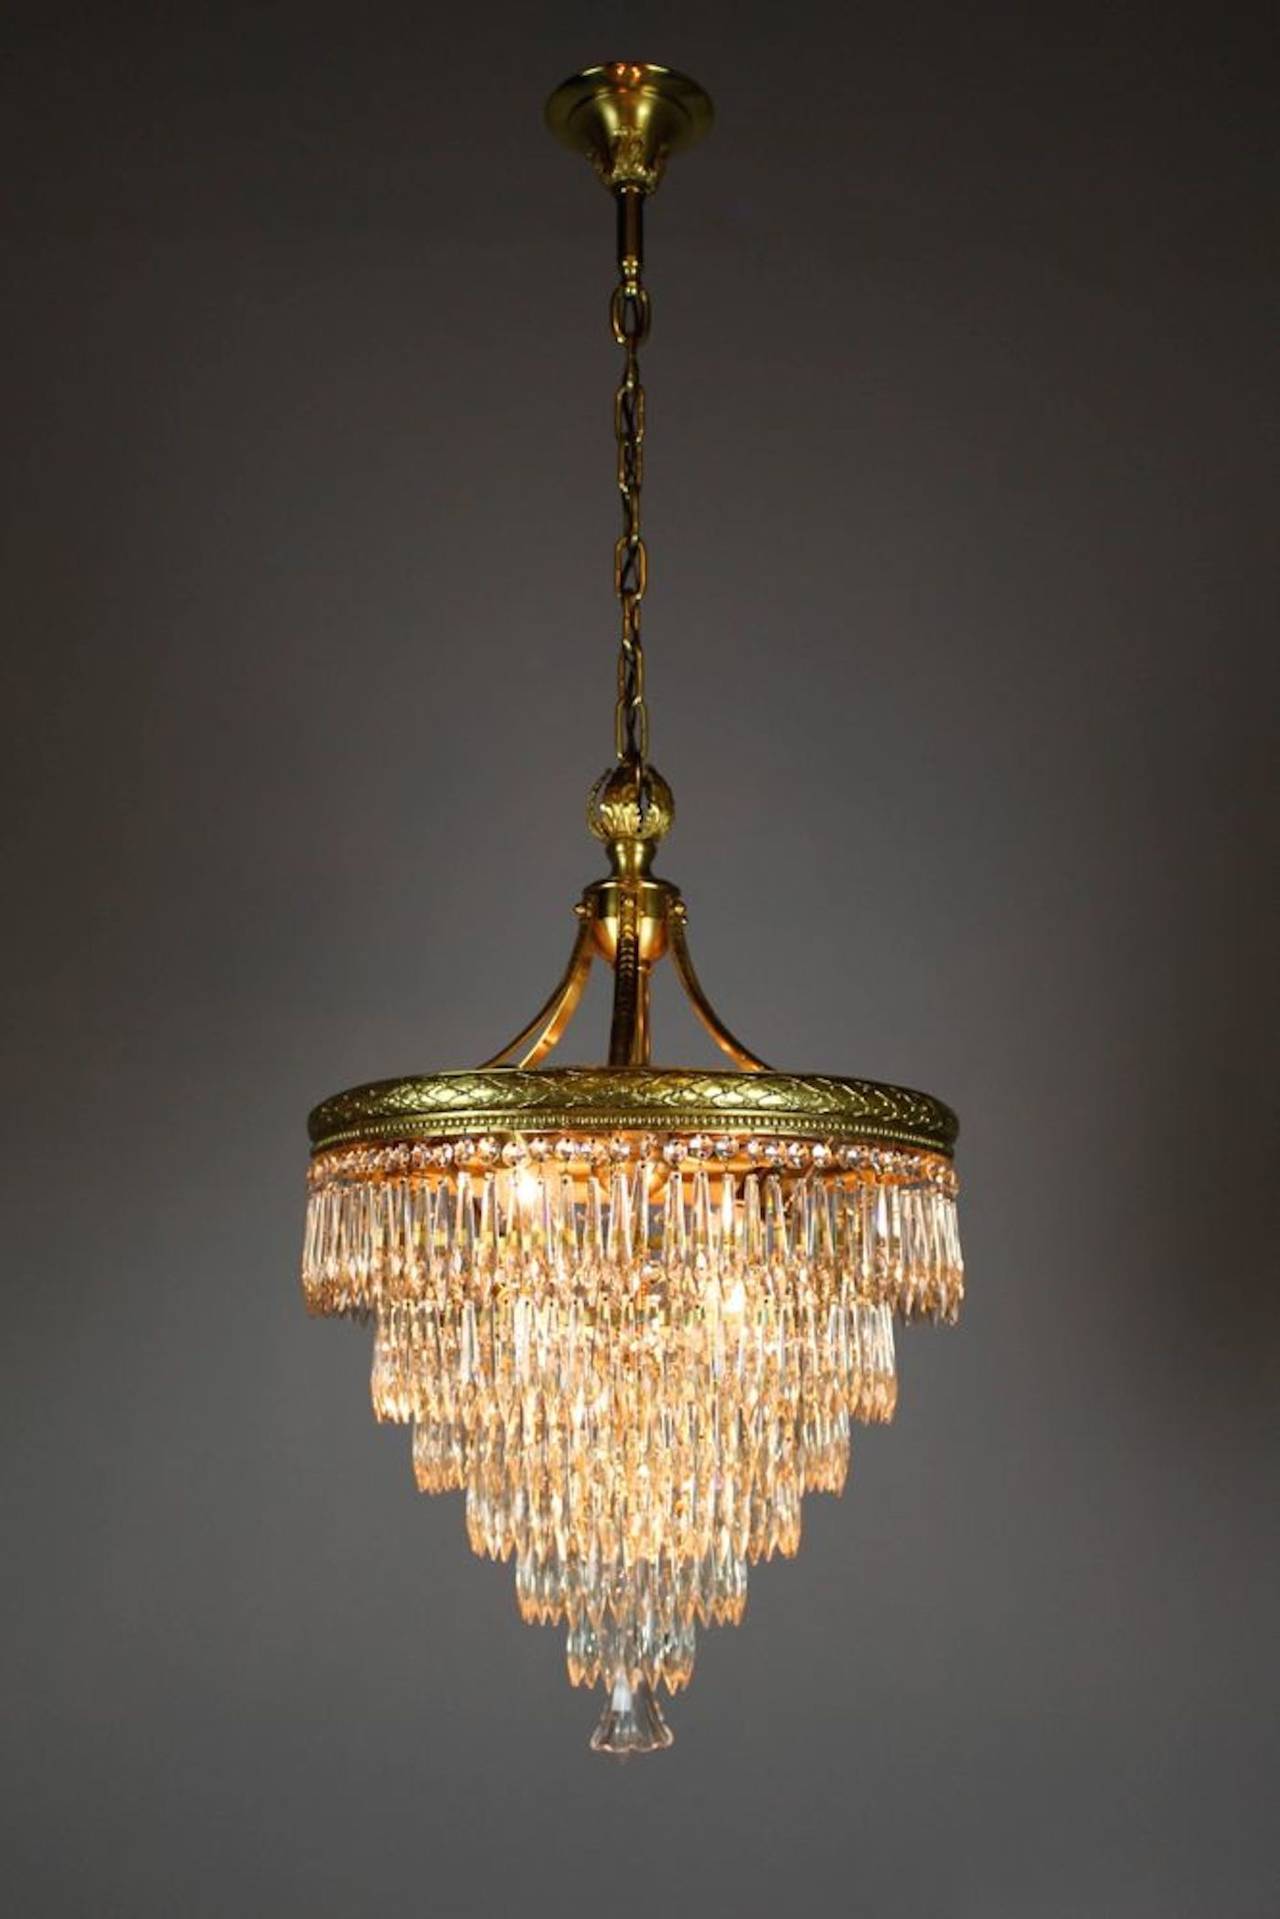 This is an absolutely stunning light, attributed to E. Miller & Company, circa 1910. This seven-tiered crystal chandelier is in what is referred to as 